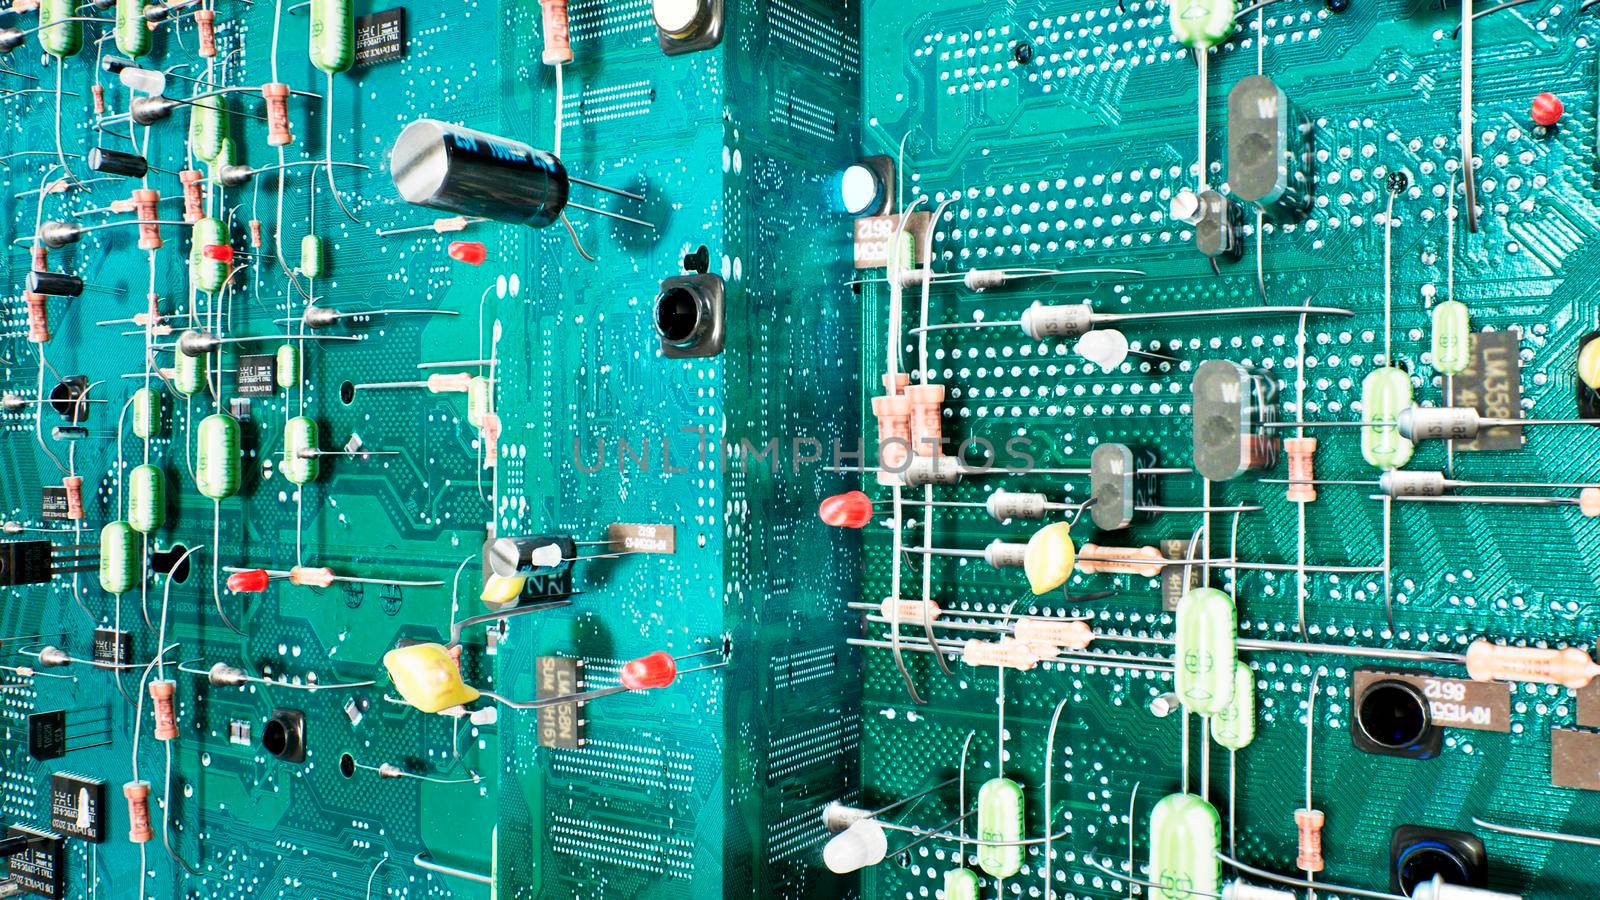 Technological background of the circuit board. Inside the electronic device are the components of the motherboard: microcircuits, transistors, LEDs, semiconductors.